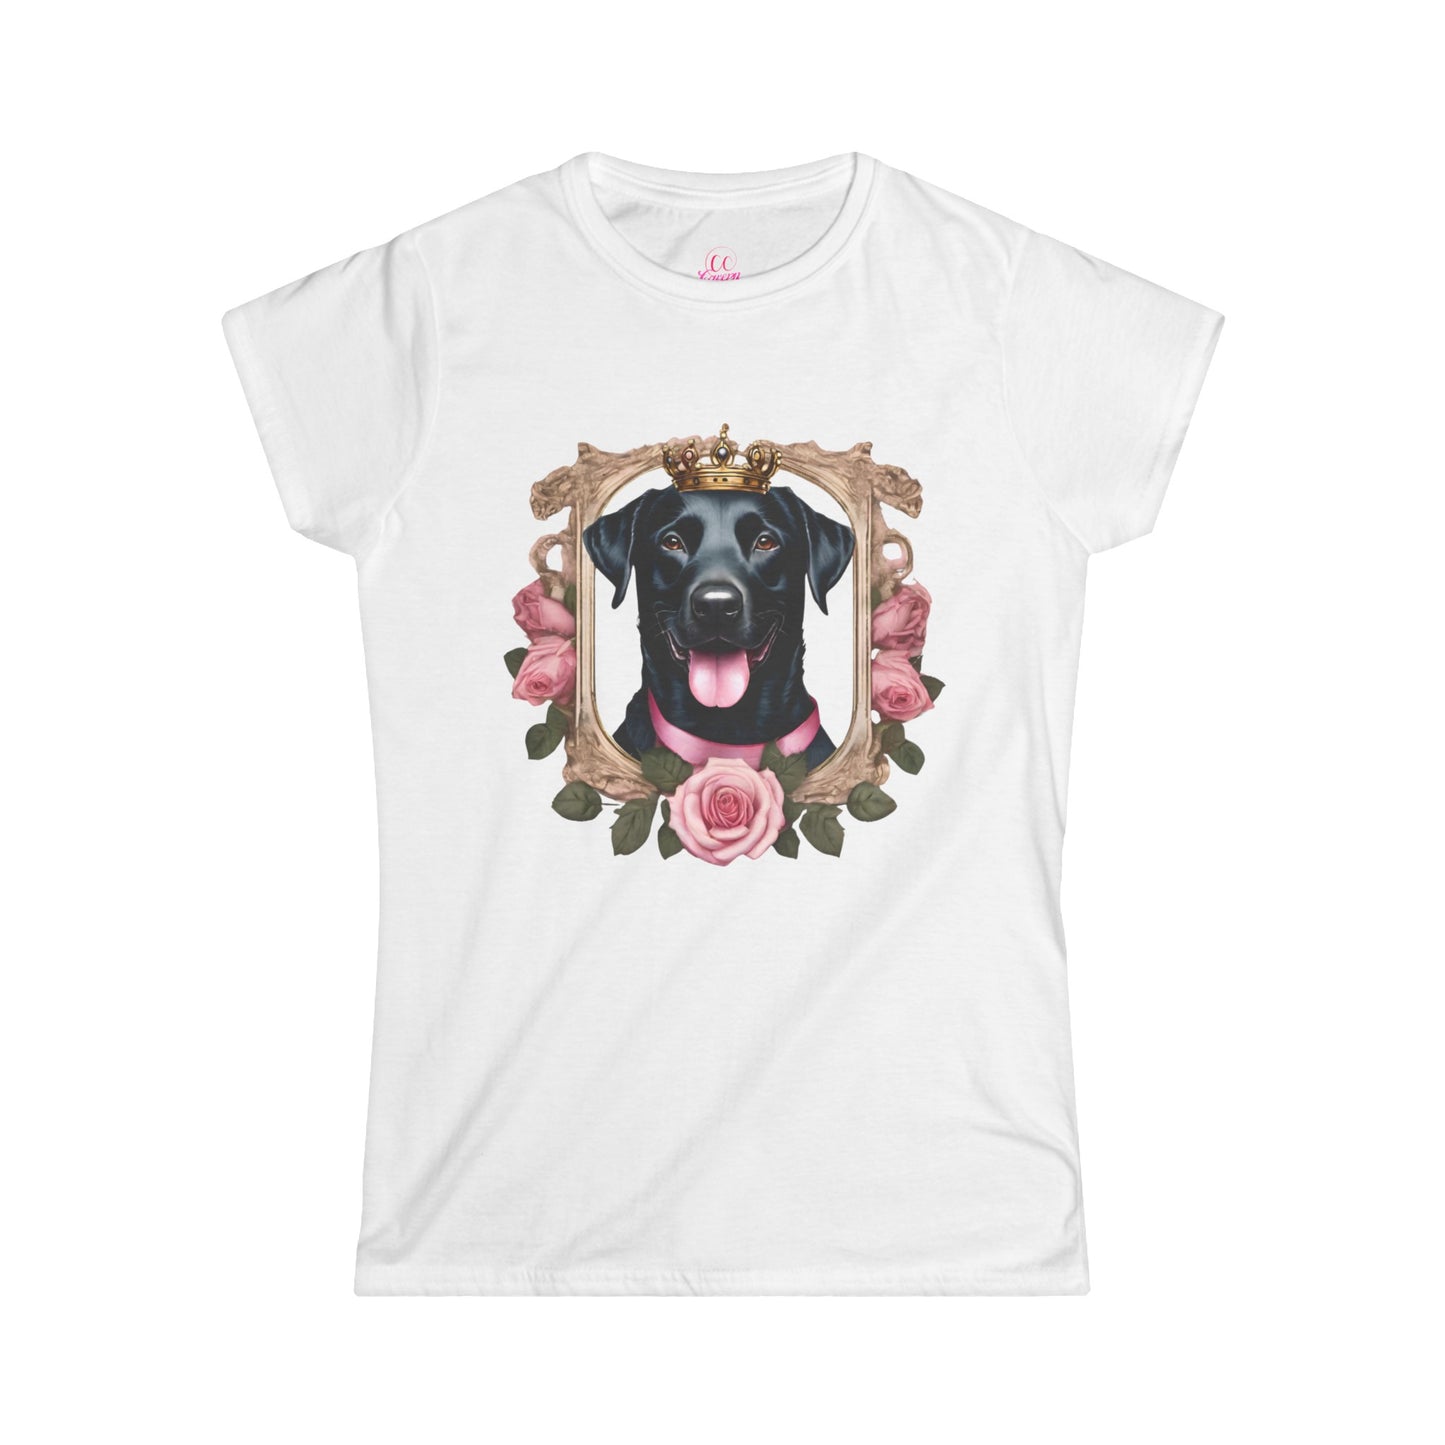 Coquette Pink Rose Smiling Black Labrador Prince Princess Puppy Dog Women's Softstyle Short Sleeved Tee Size S-2xl